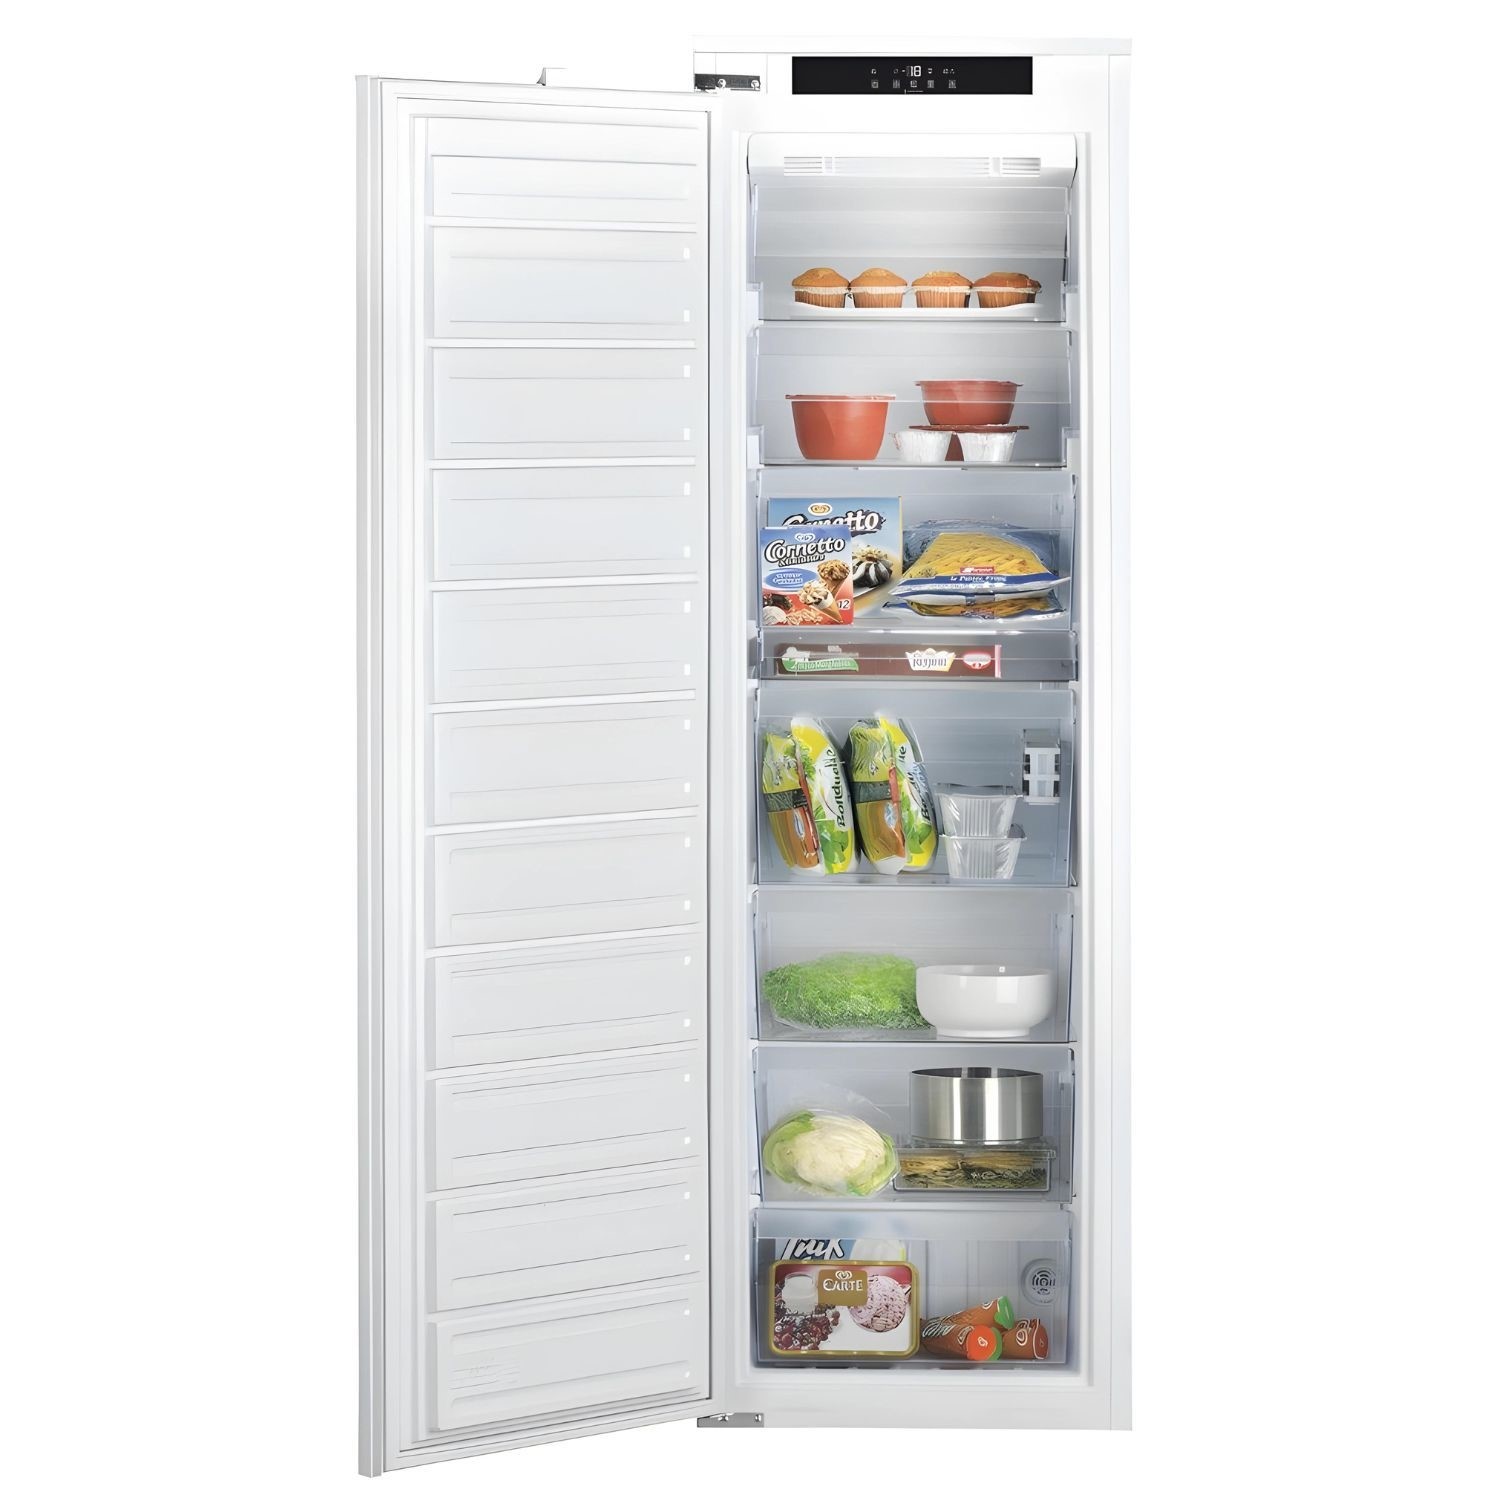 Photos - Other for Computer Hotpoint-Ariston HOTPOINT 209 Litre Integrated Upright Freezer - White 859991669310 